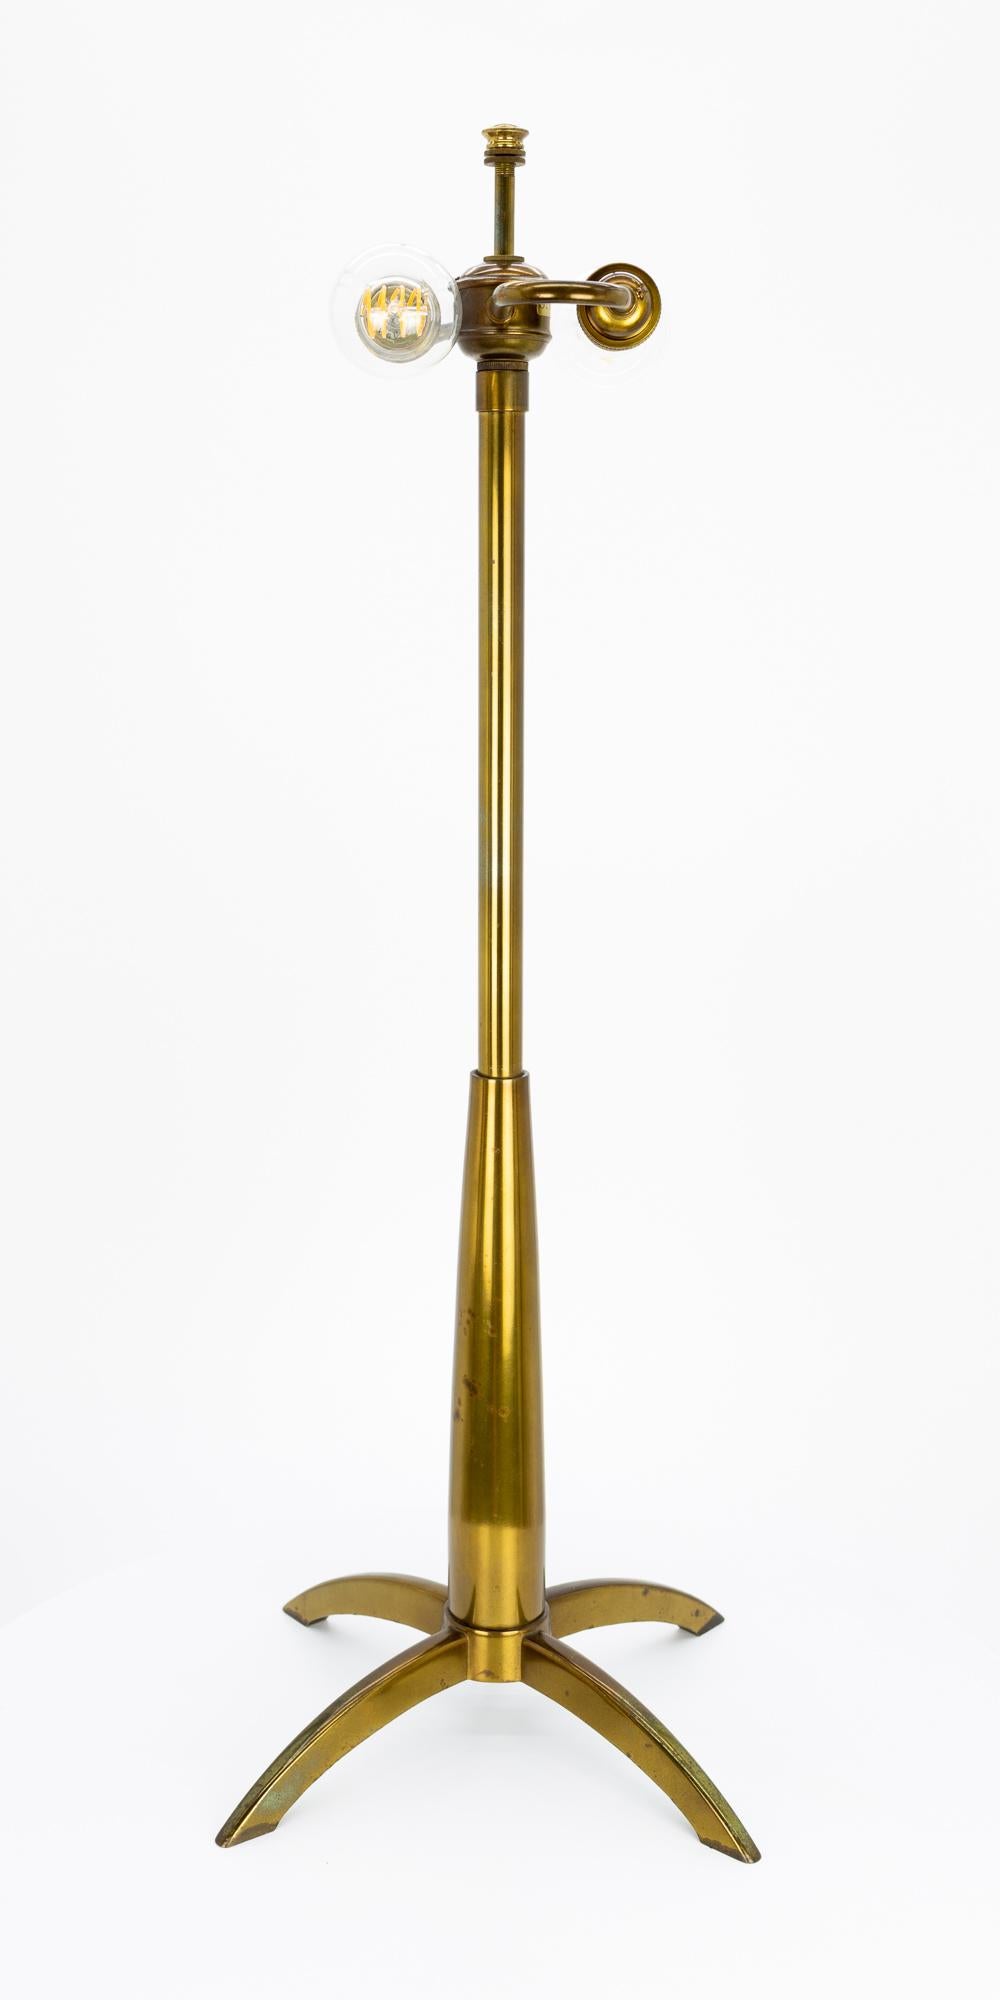 Gerald Thurston for Stiffel mid century brass rocket table lamp

This piece measures: 14 wide x 14 deep x 31 inches high and weighs 6.7 pounds

Excellent vintage condition

Each lamp is carefully cleaned and packaged before being shipped to